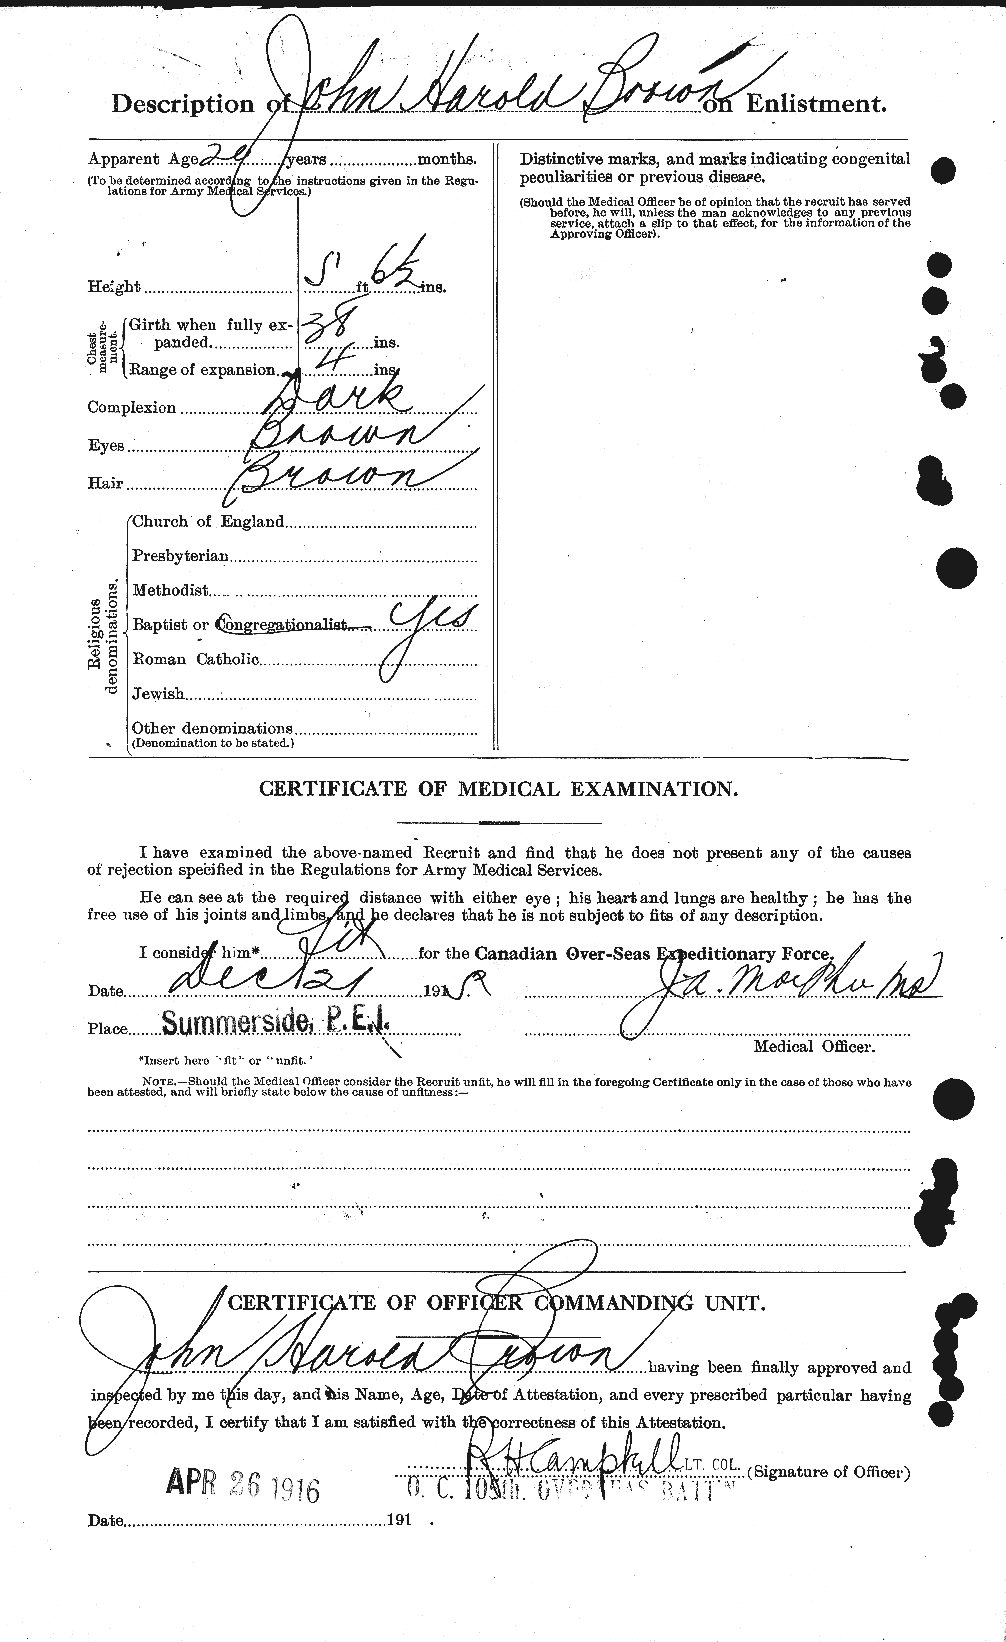 Personnel Records of the First World War - CEF 264606b